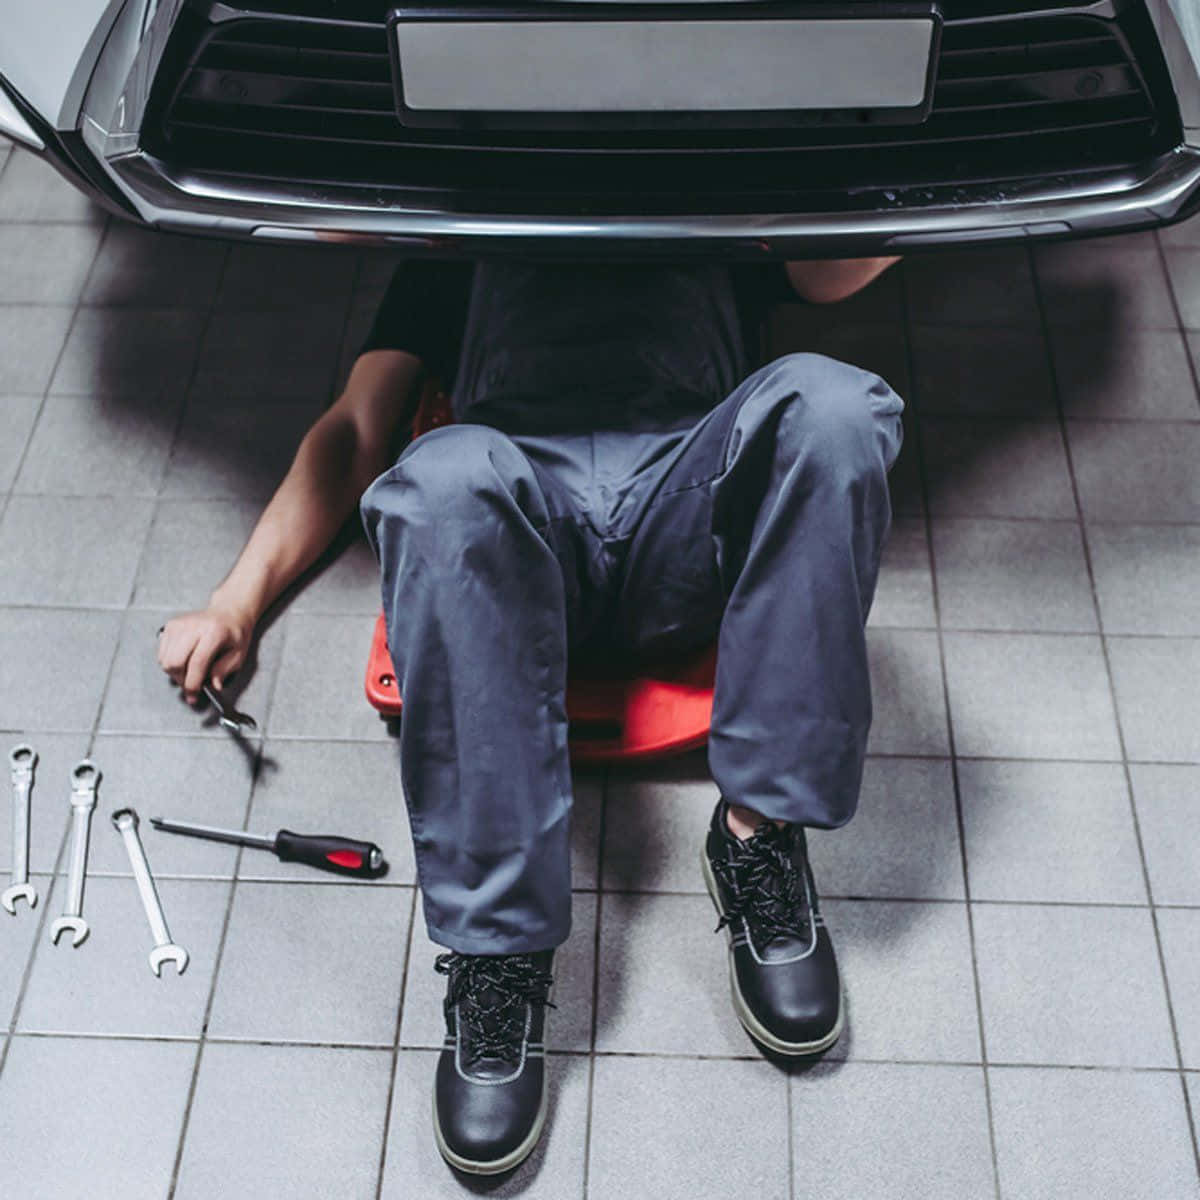 A Mechanic Is Laying On The Floor Of A Car Repair Shop